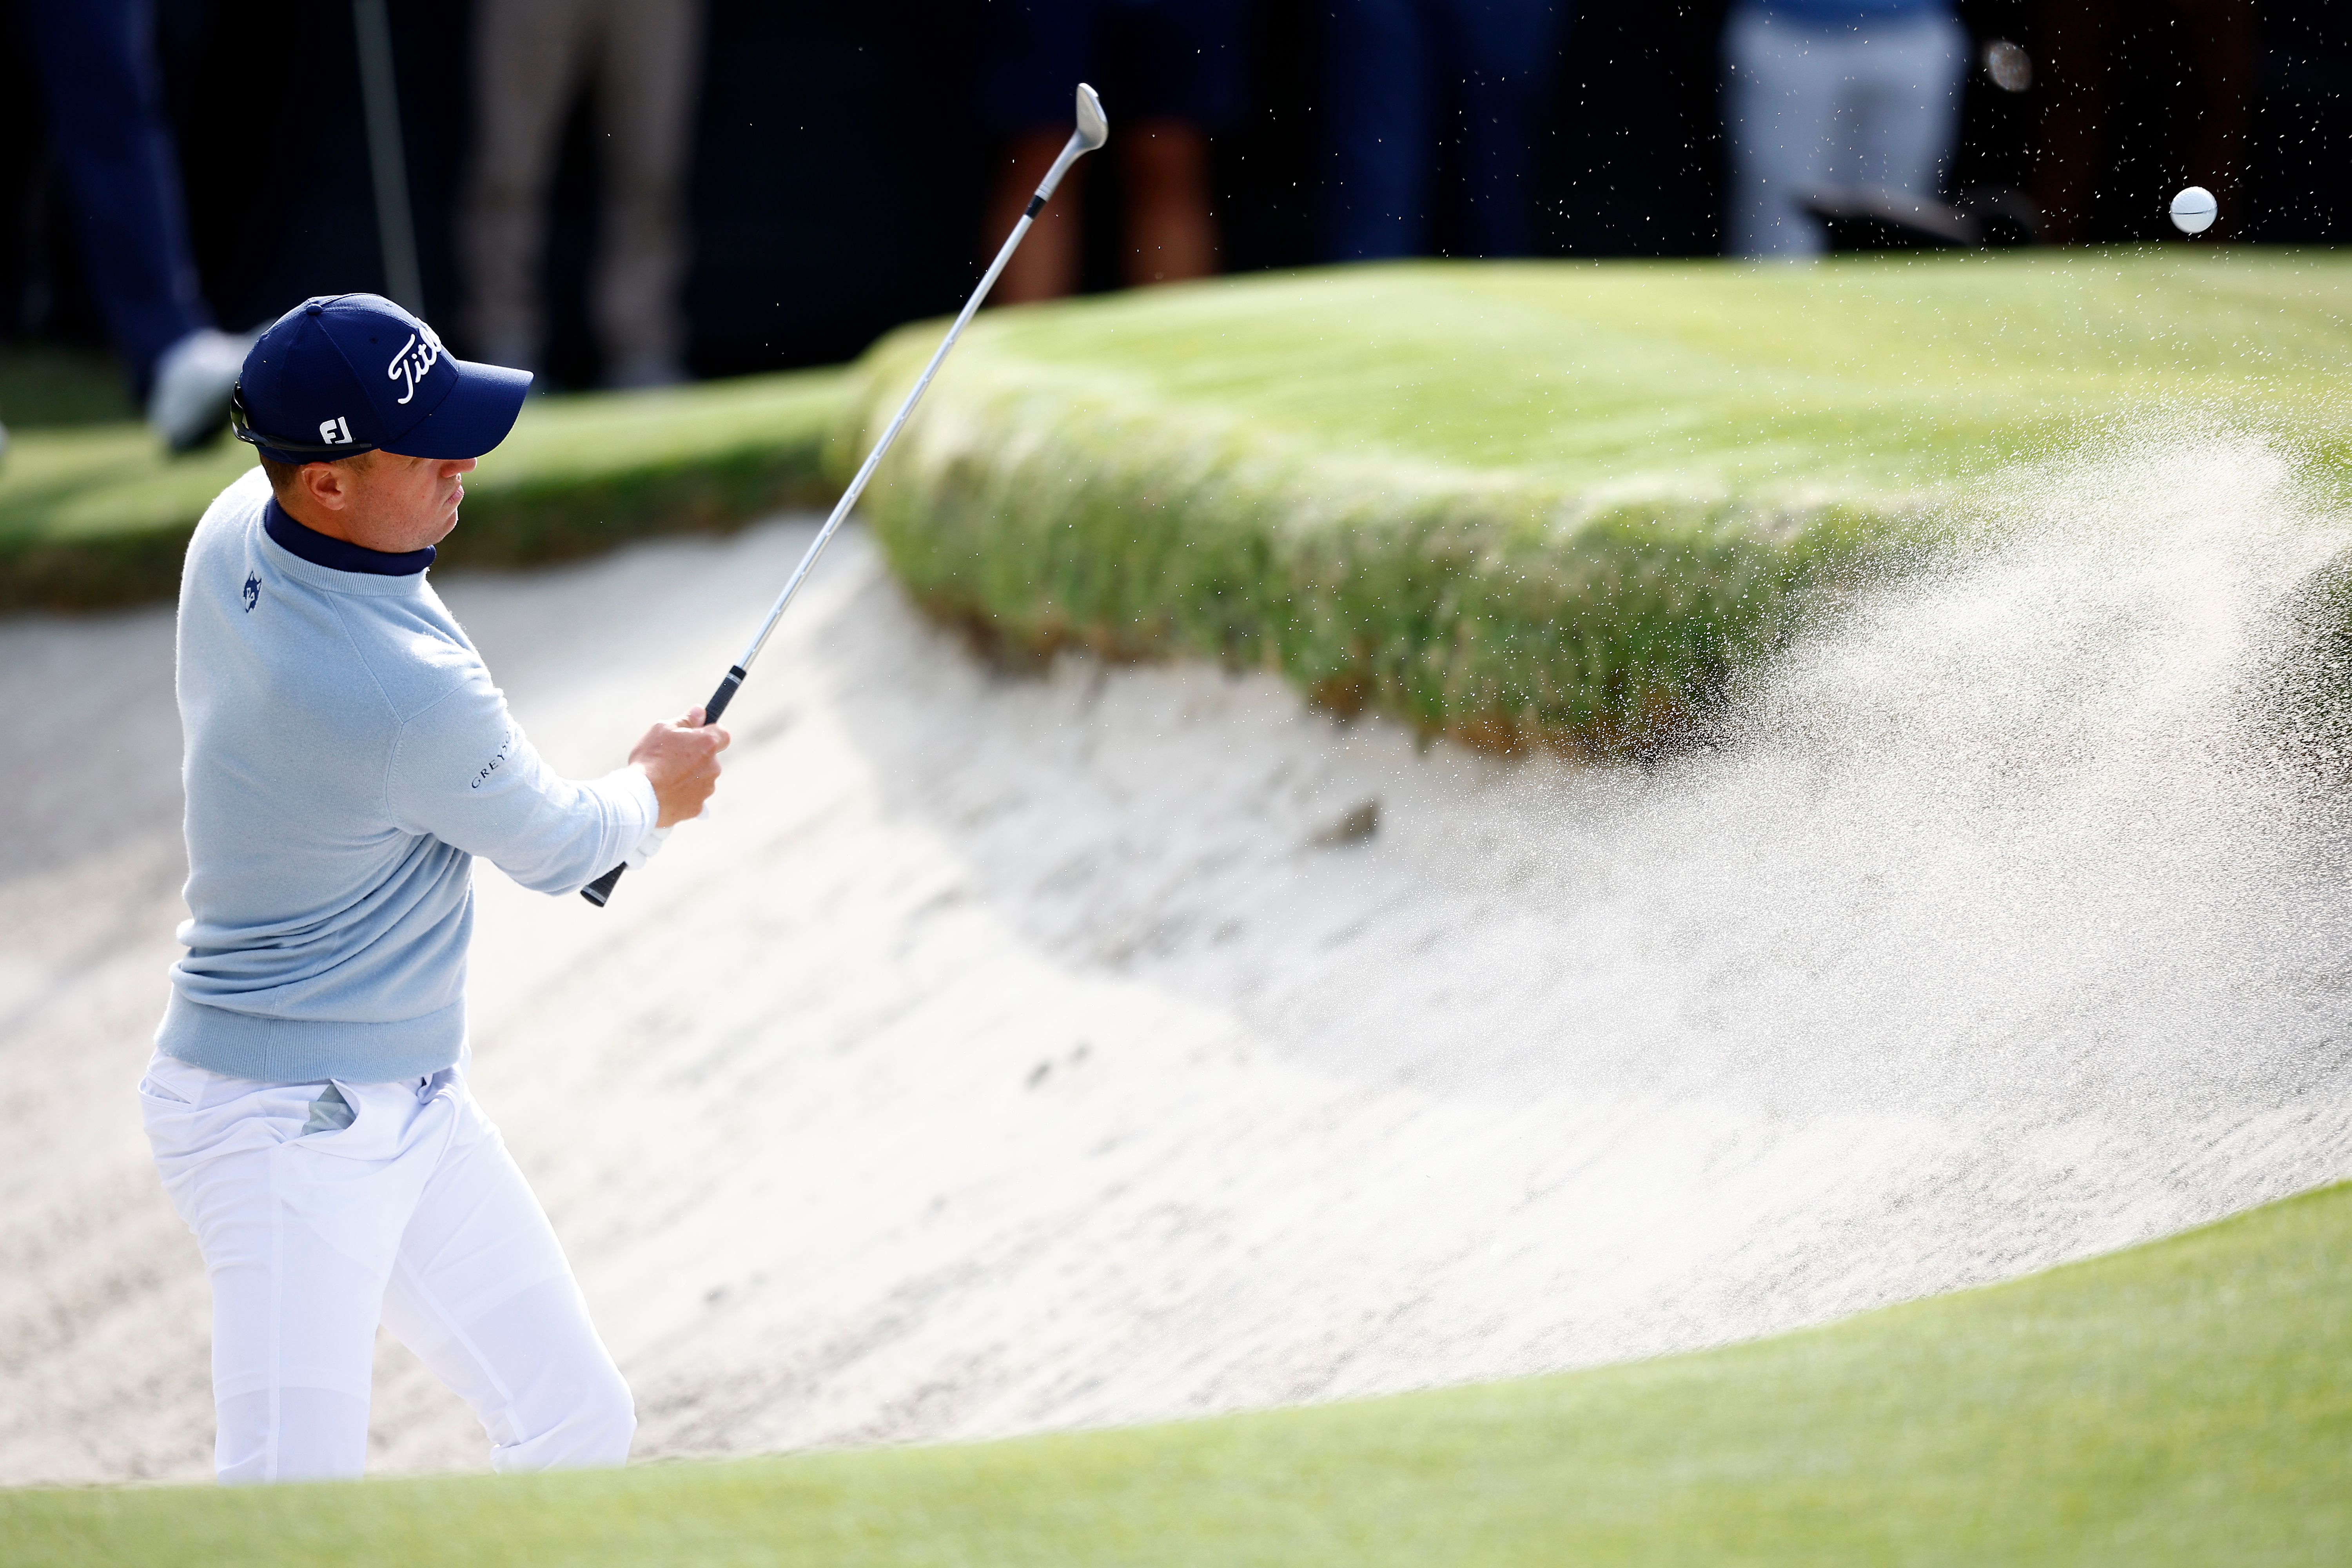 Justin Thomas plays his shot from the bunker on the 10th hole during the first round of the The Genesis Invitational at Riviera Country Club.